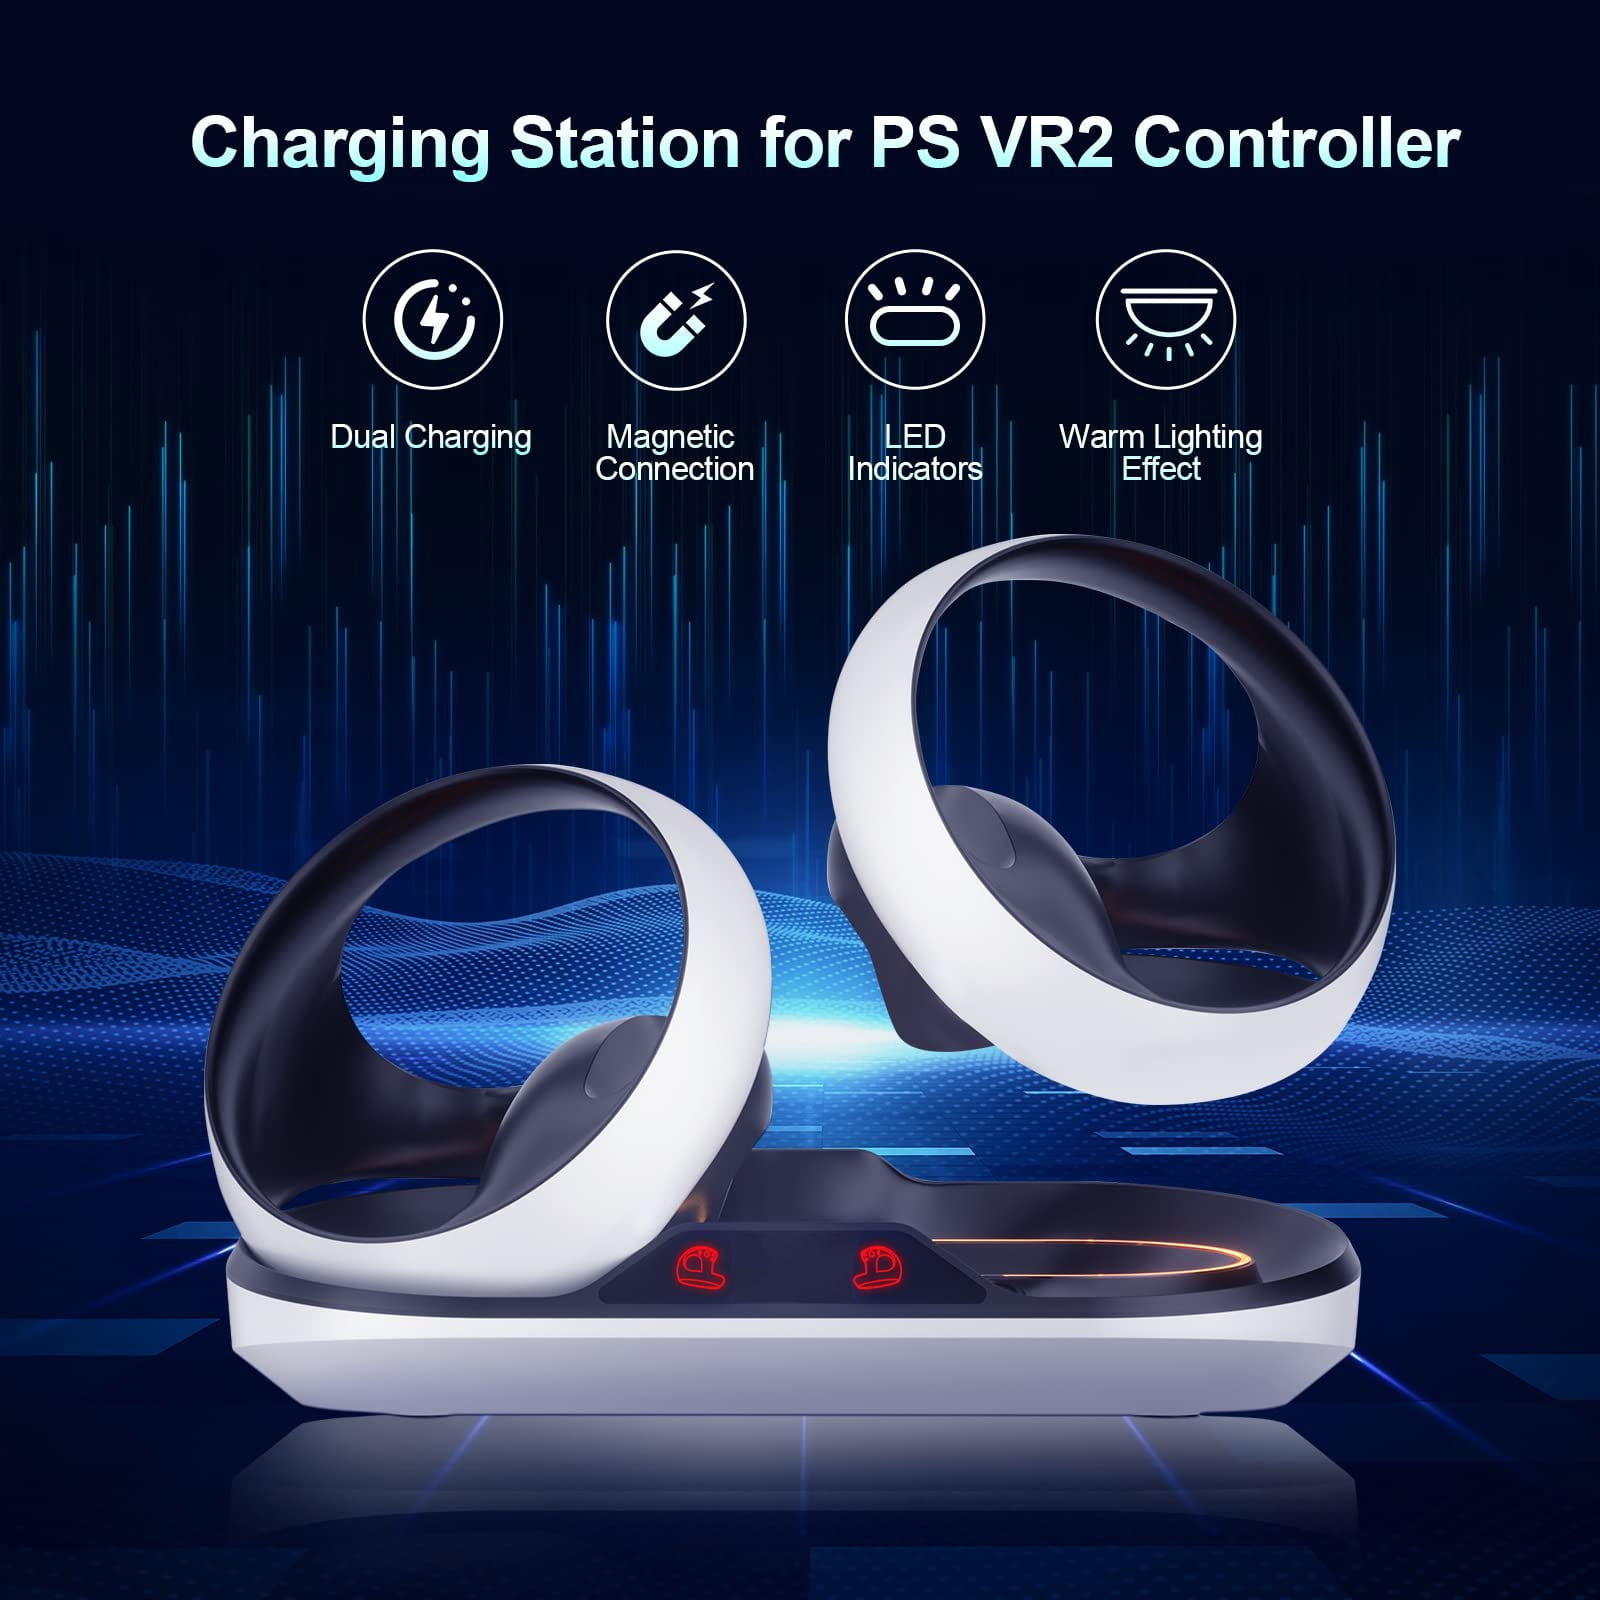  Controller Charging Dock for PS5 VR2, PSVR 2 Charging Station  with VR Headset Holder Display Stand, PS VR2 Controller Charger for PSVR2  Accessories with Led Indicator, 2 Magnetic Clasp & Type-C